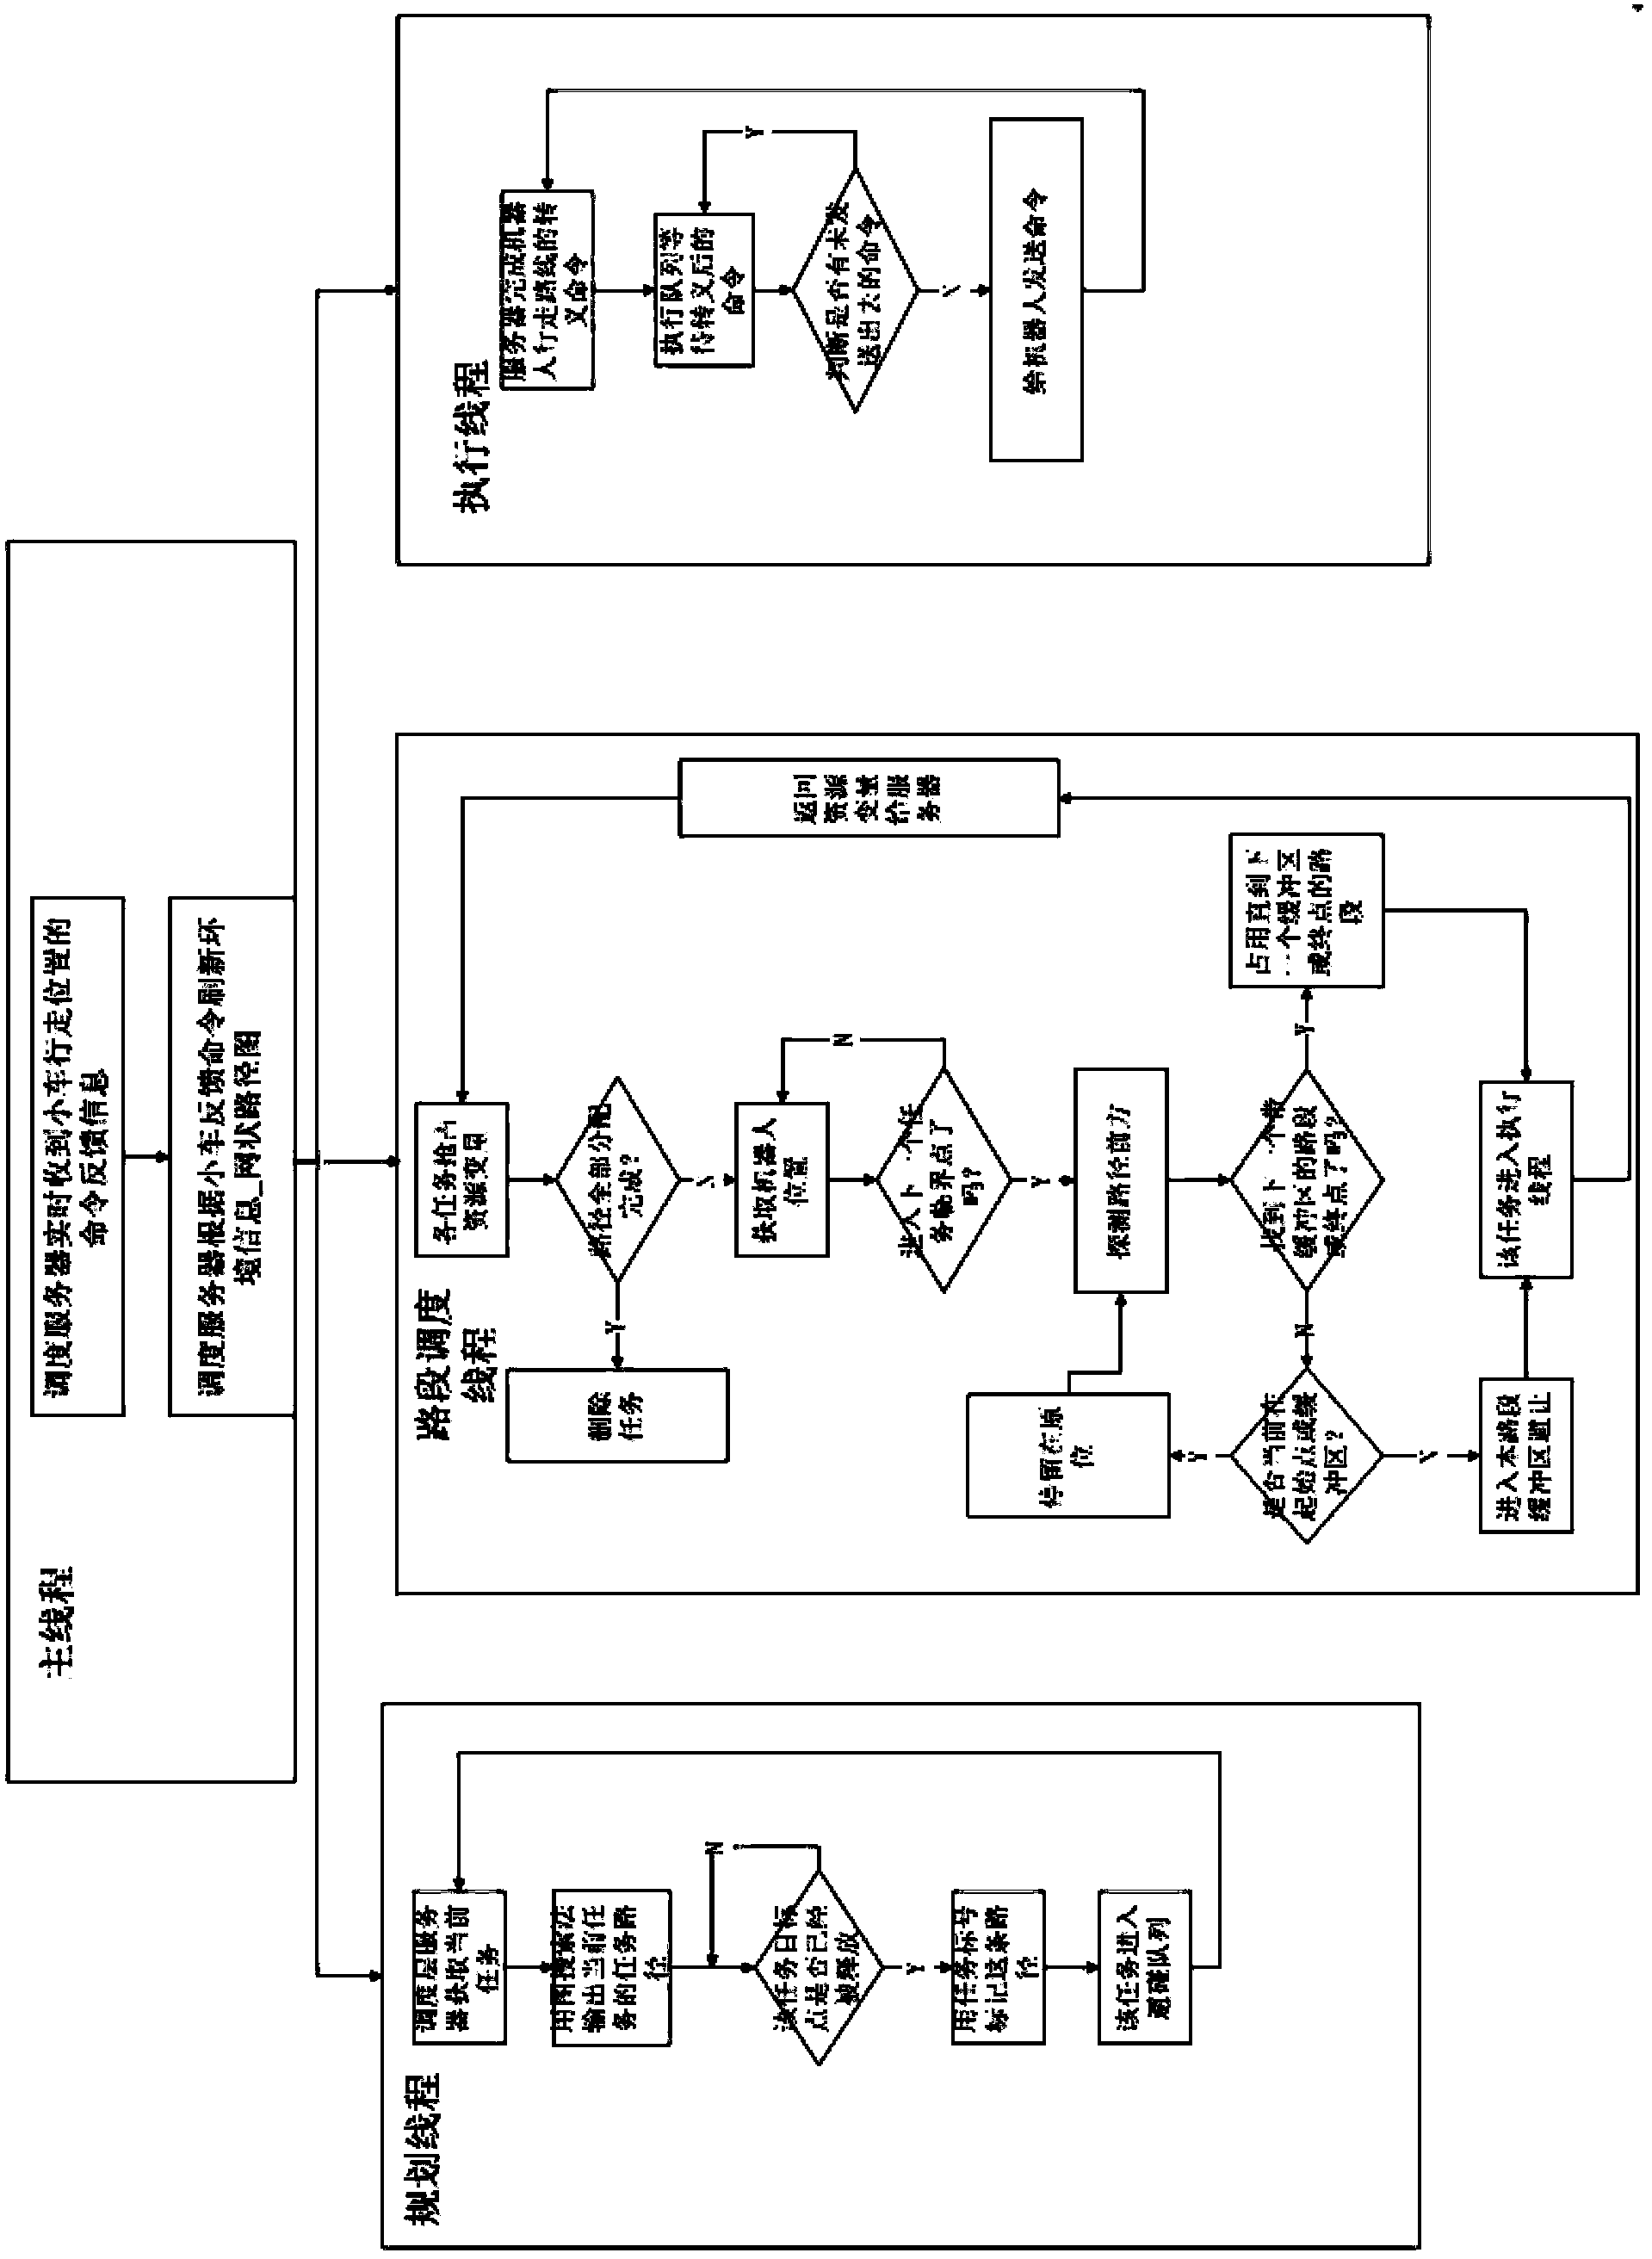 Method for solving multiple mobile robot path conflict based on buffer area